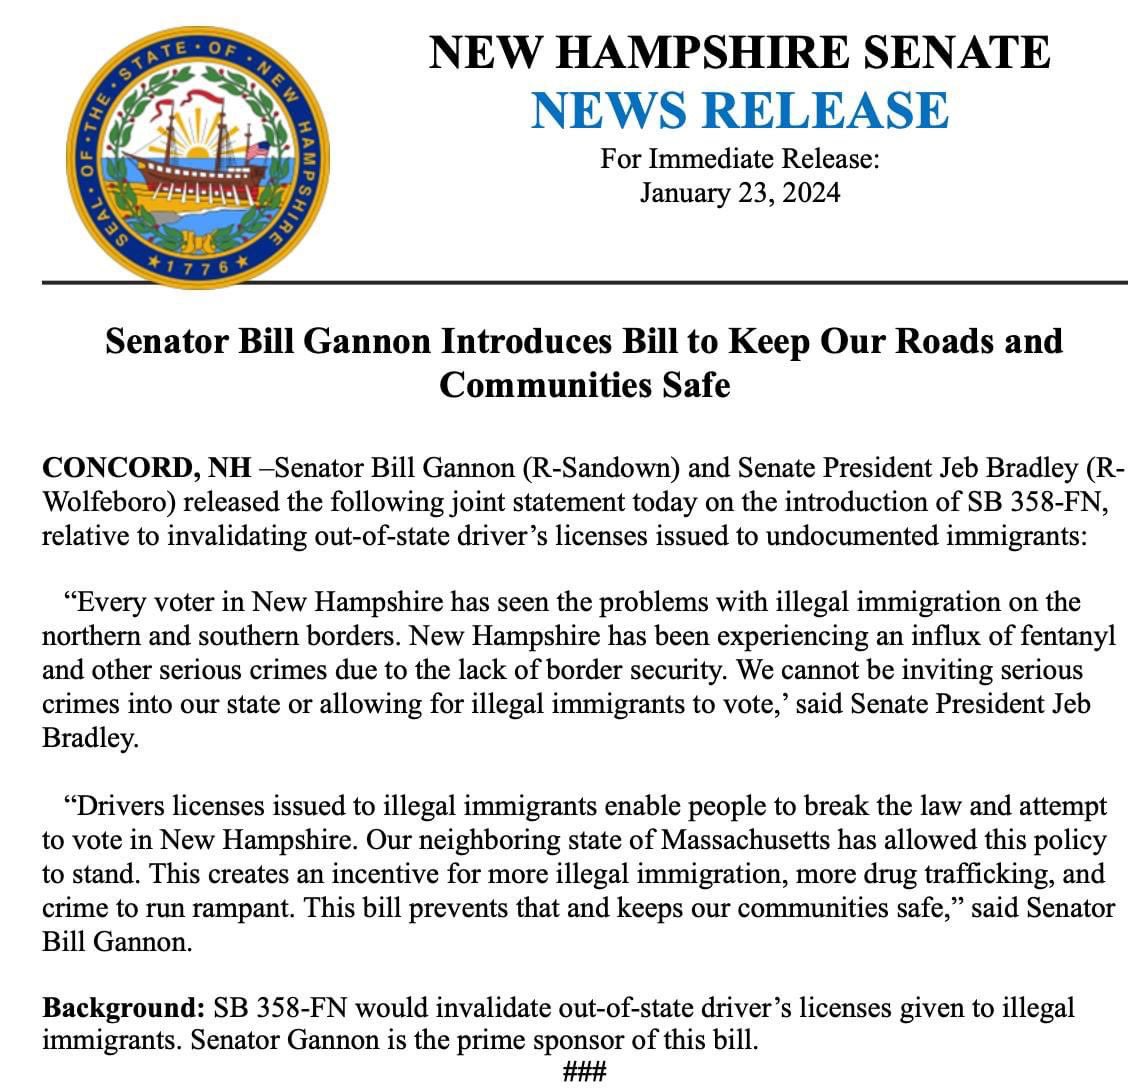 In response to Biden’s border crisis, I’ve introduced legislation to ensure we’re doing everything possible to keep New Hampshire communities safe and secure.